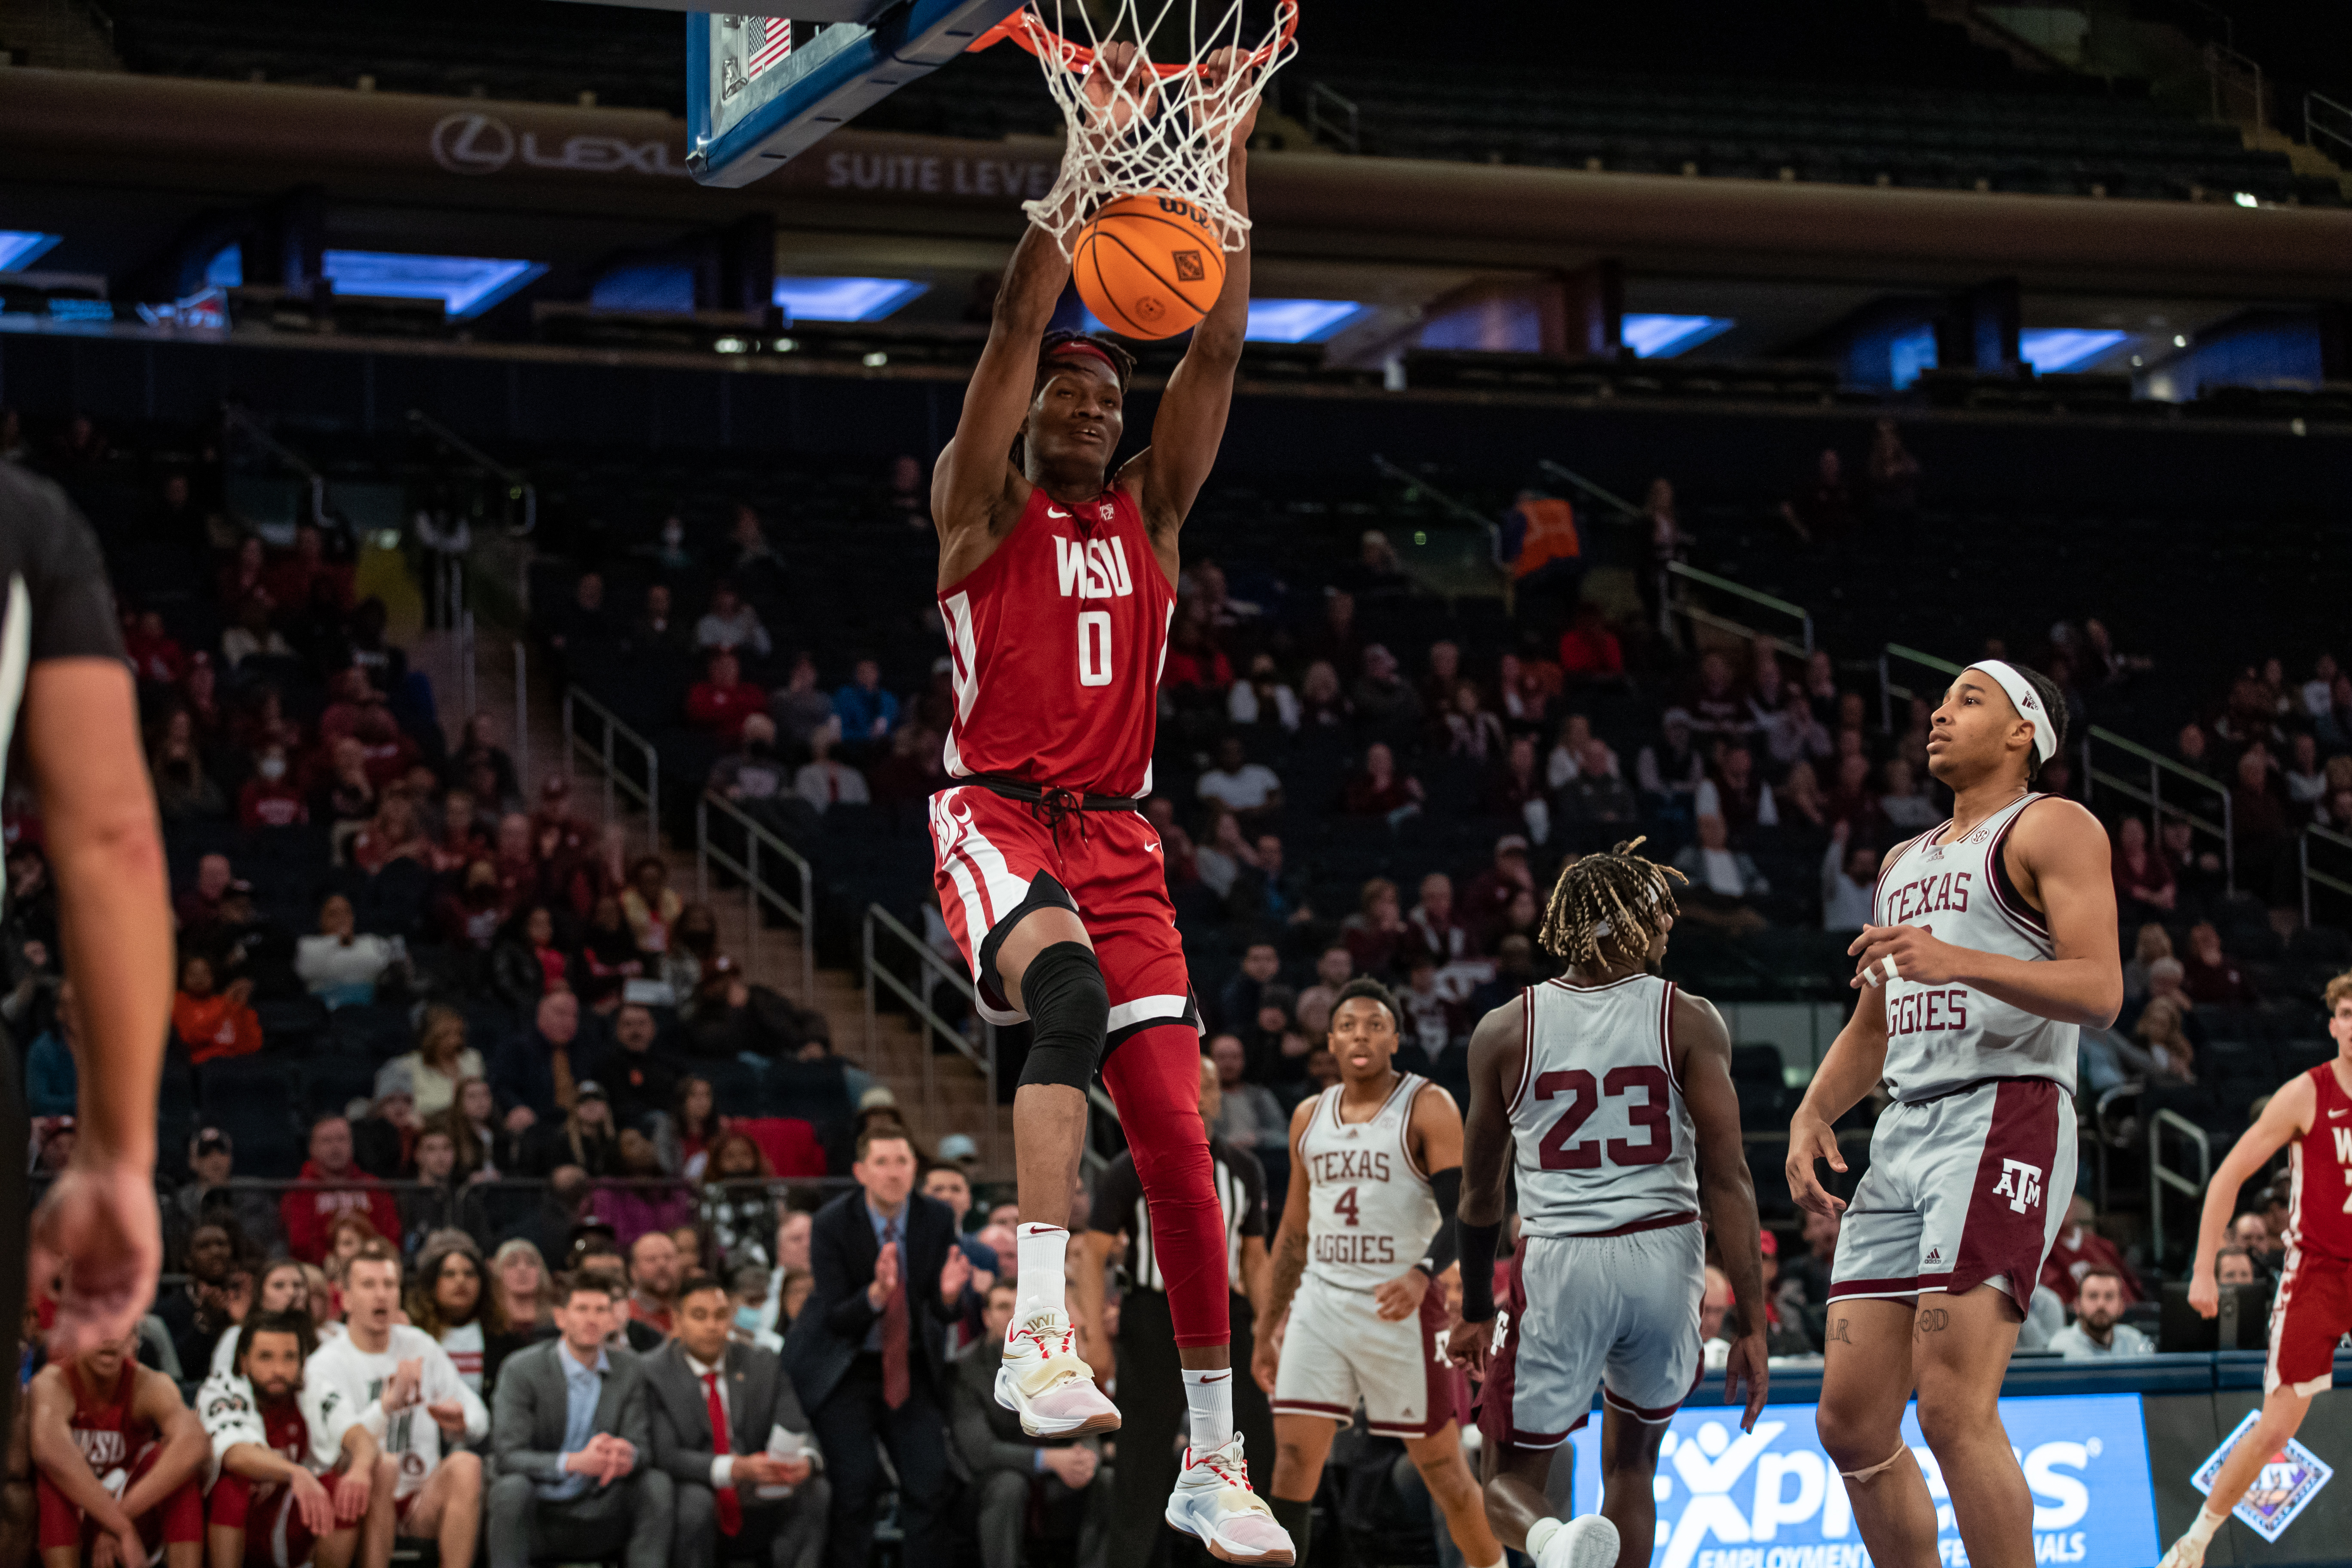 NEW YORK CITY, NY - MARCH 29: Washington State Cougars face off against the Texas A&amp;M Aggies in the NIT Final Four at Madison Square Garden - Washington State forward Efe Abogidi (0)